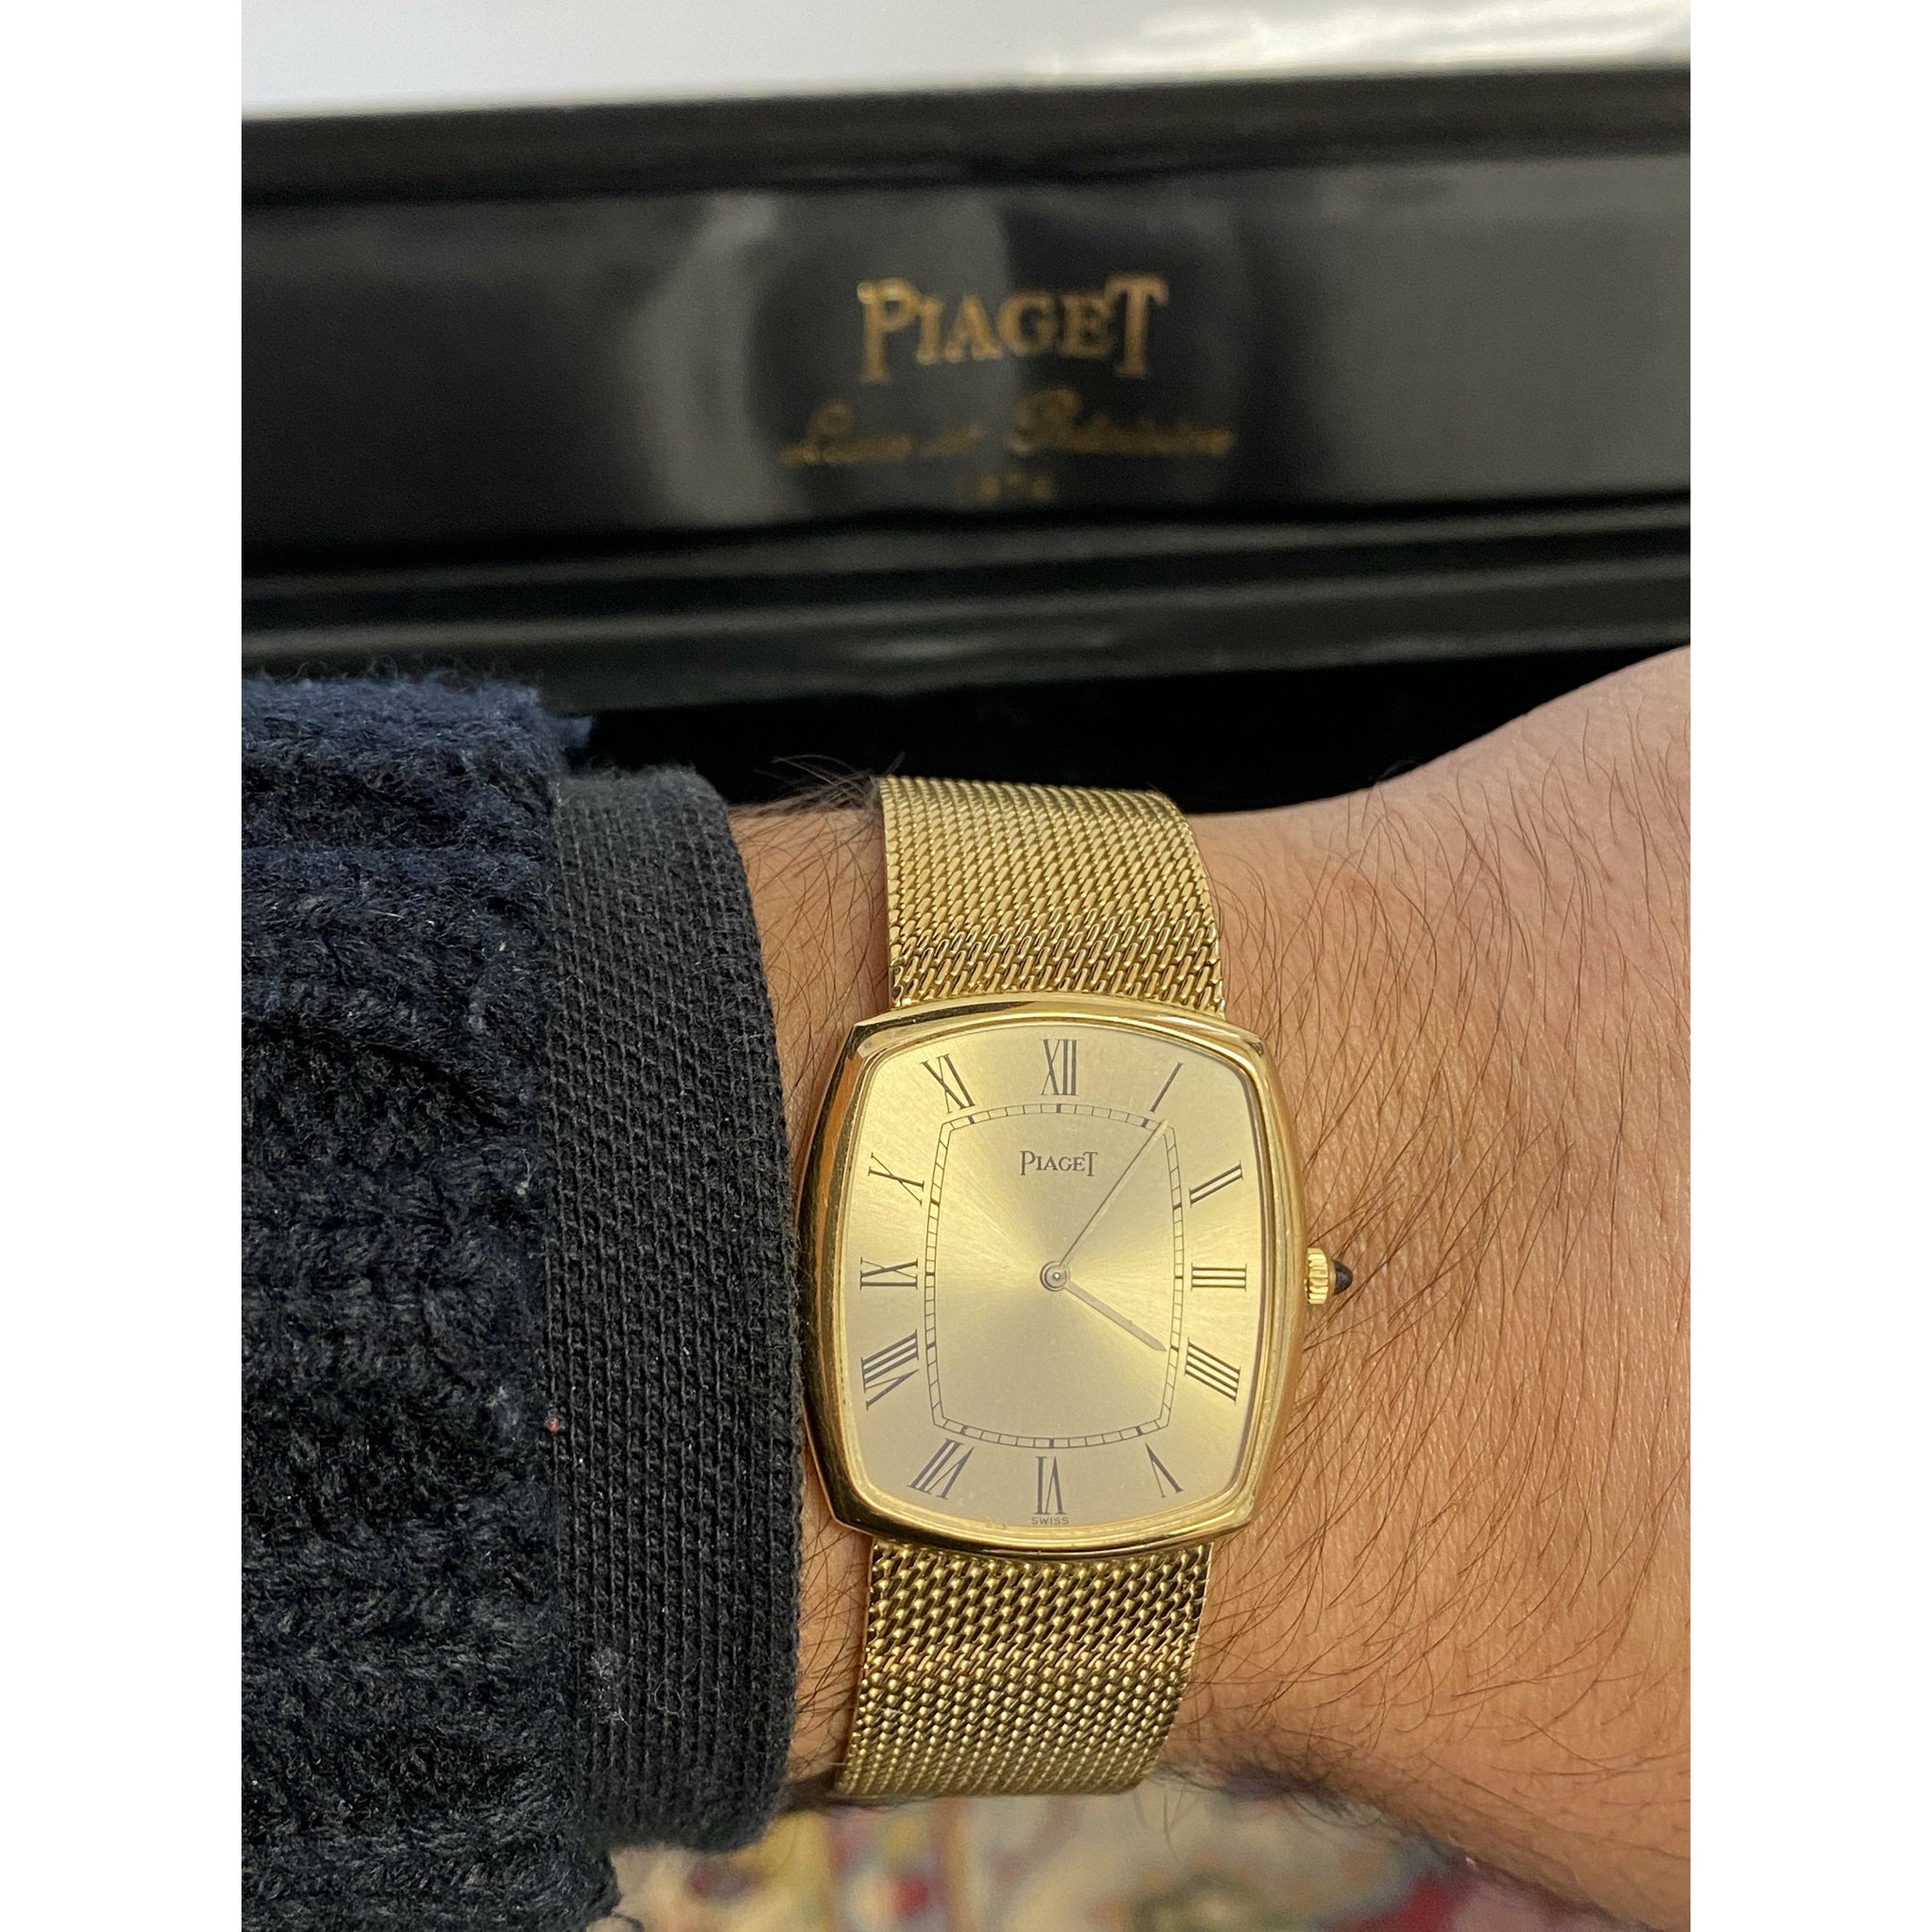 Piaget 9741 Vintage 18k Mens Watch with Gold Champagne Strap-ASSAY